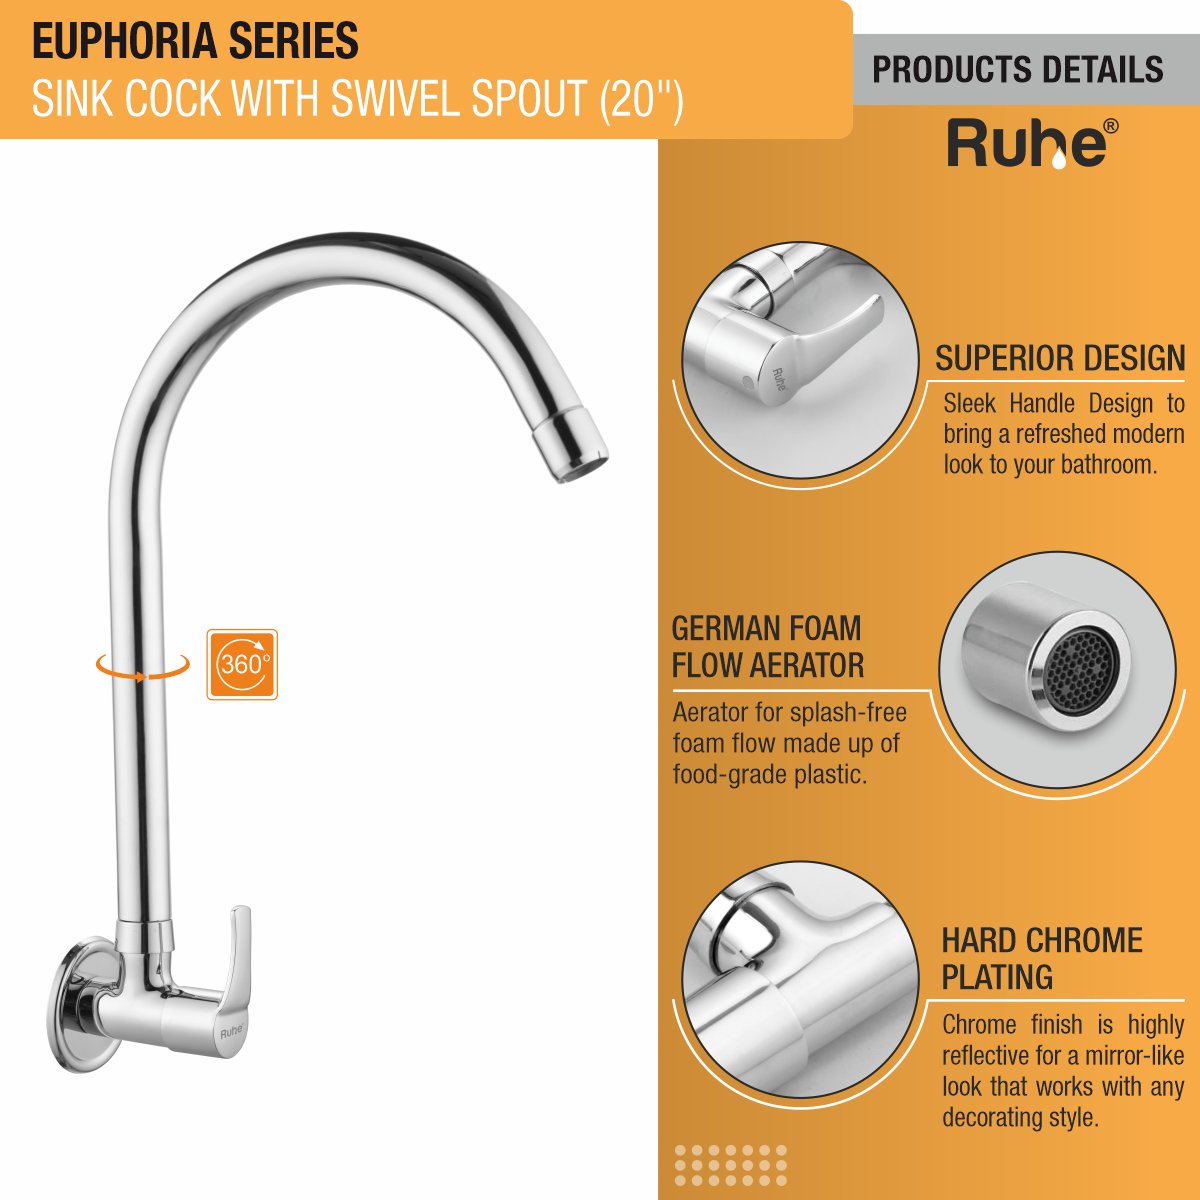 Euphoria Sink Tap with Large (20 inches) Round Swivel Spout Faucet product details